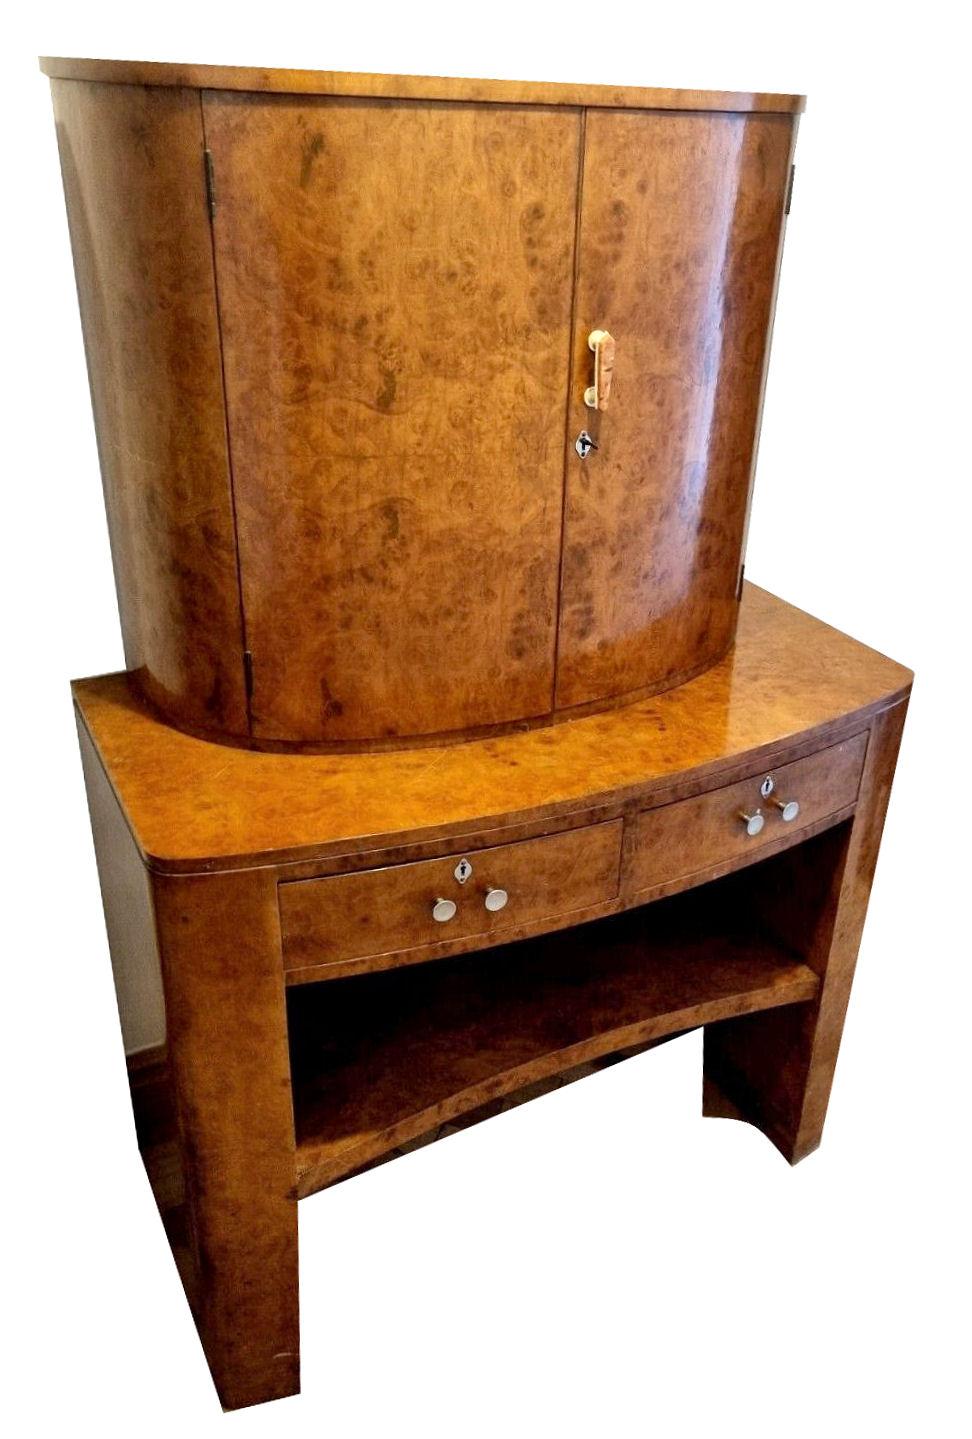 20th Century Art Deco Burr Walnut Drinks Cocktail Cabinet, Dry Bar, by H & L Epstein, C1930 For Sale